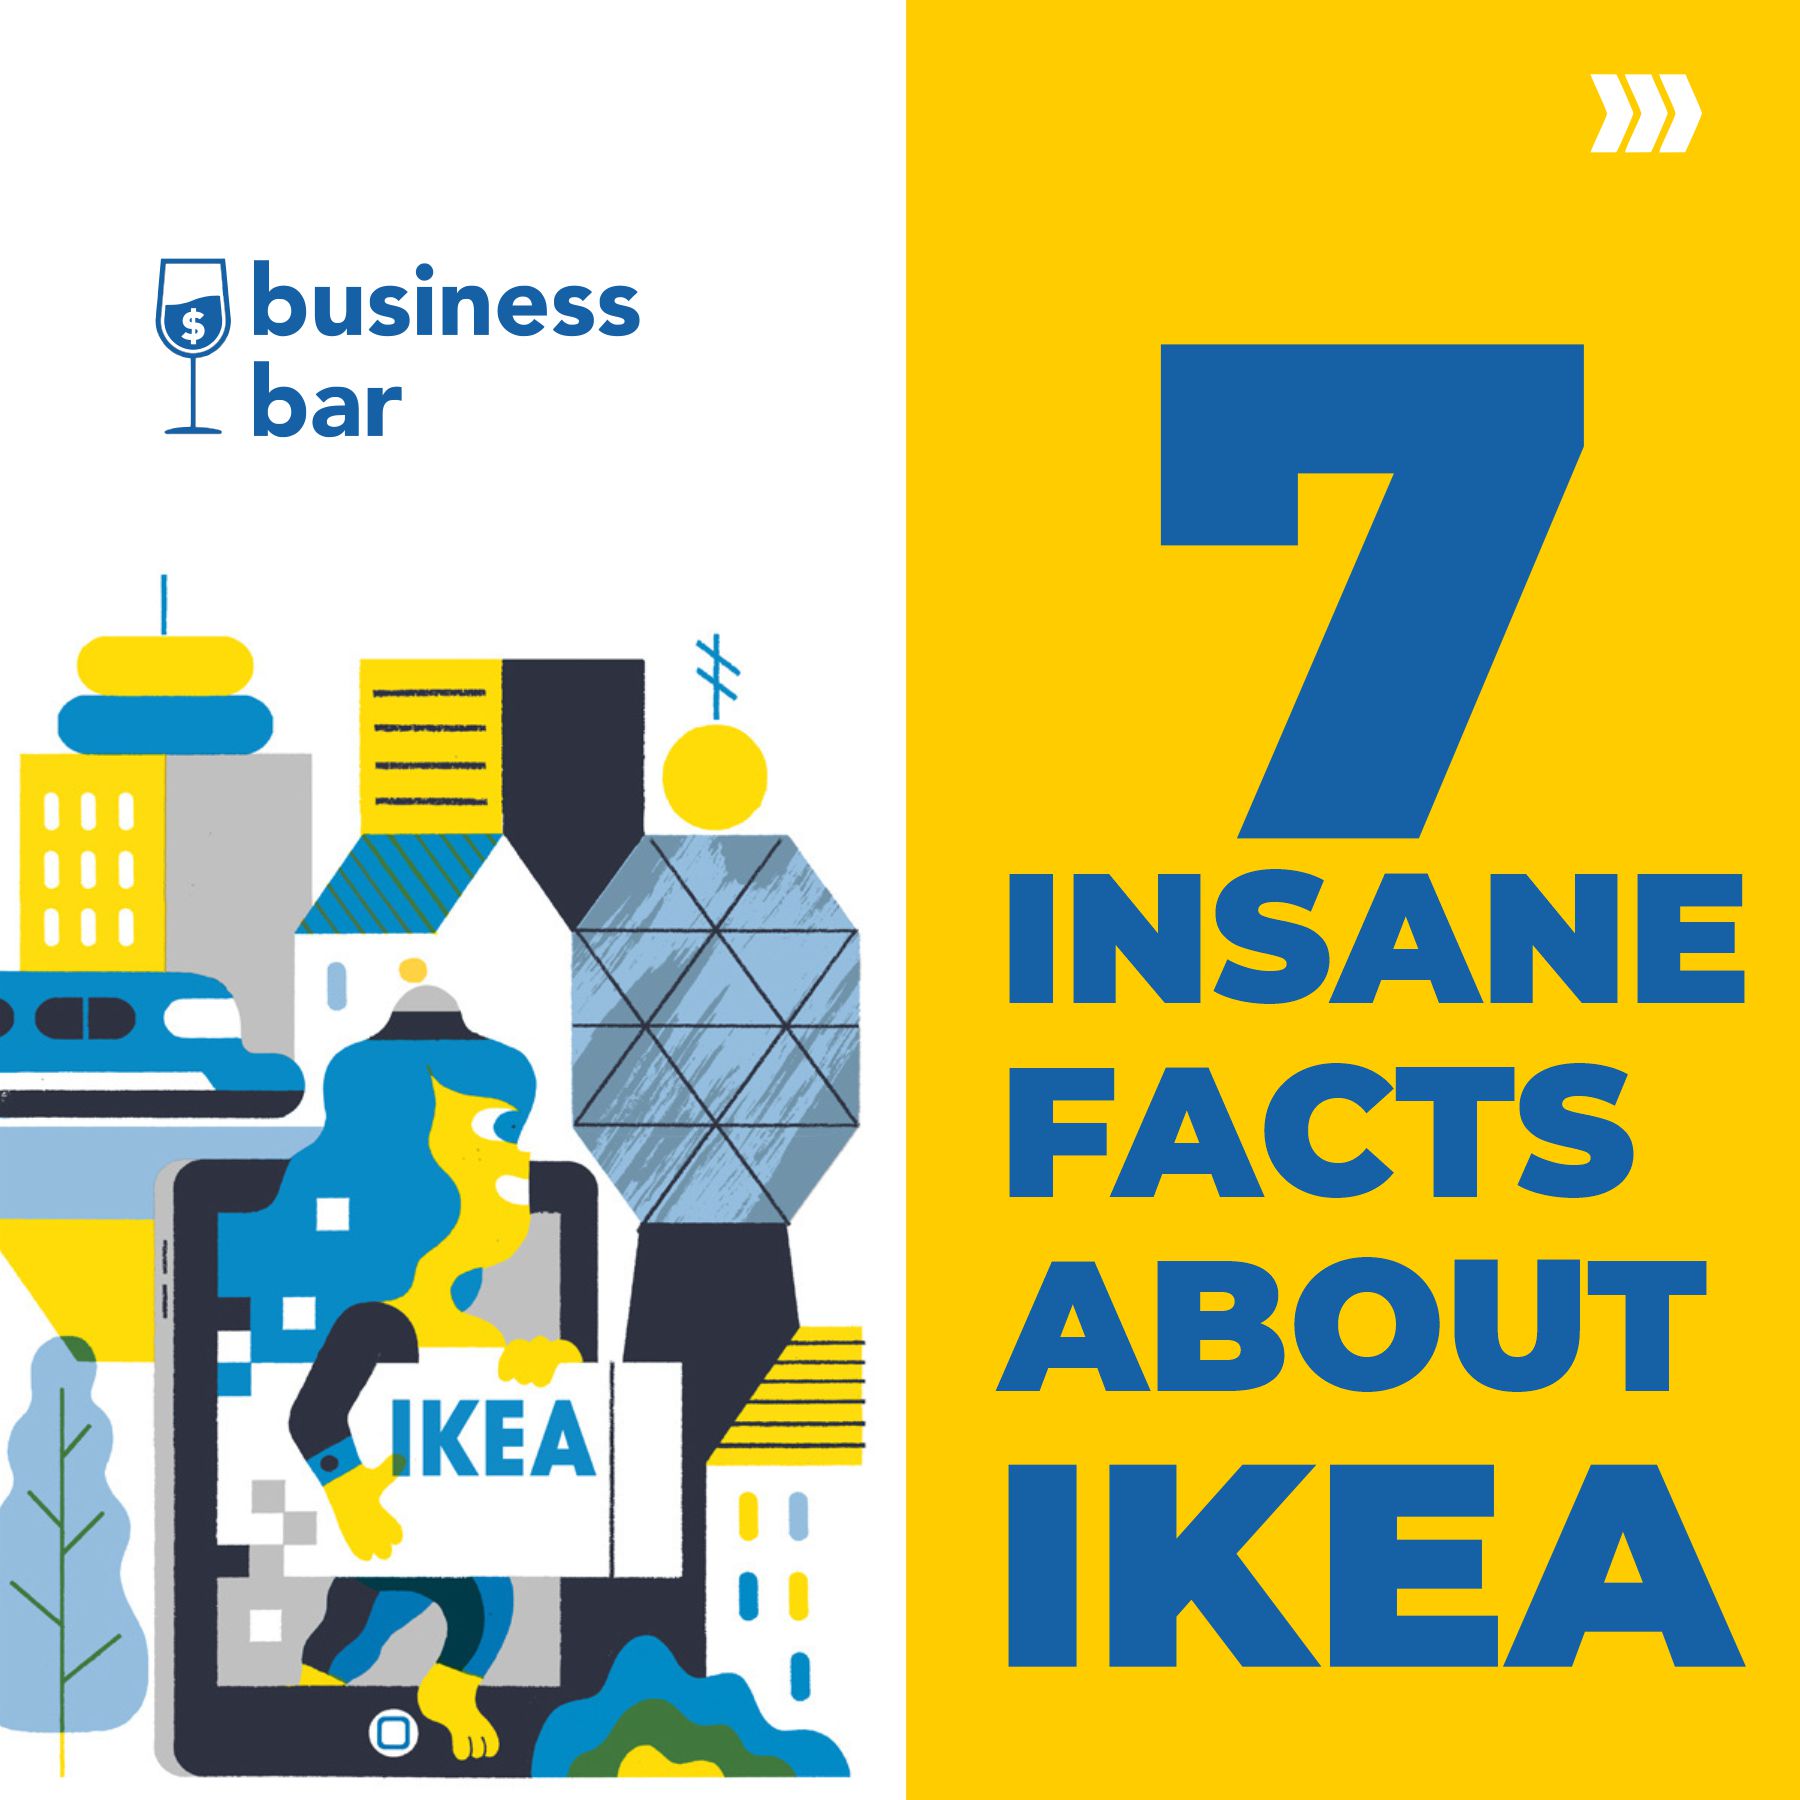 7 interesting facts about ikea